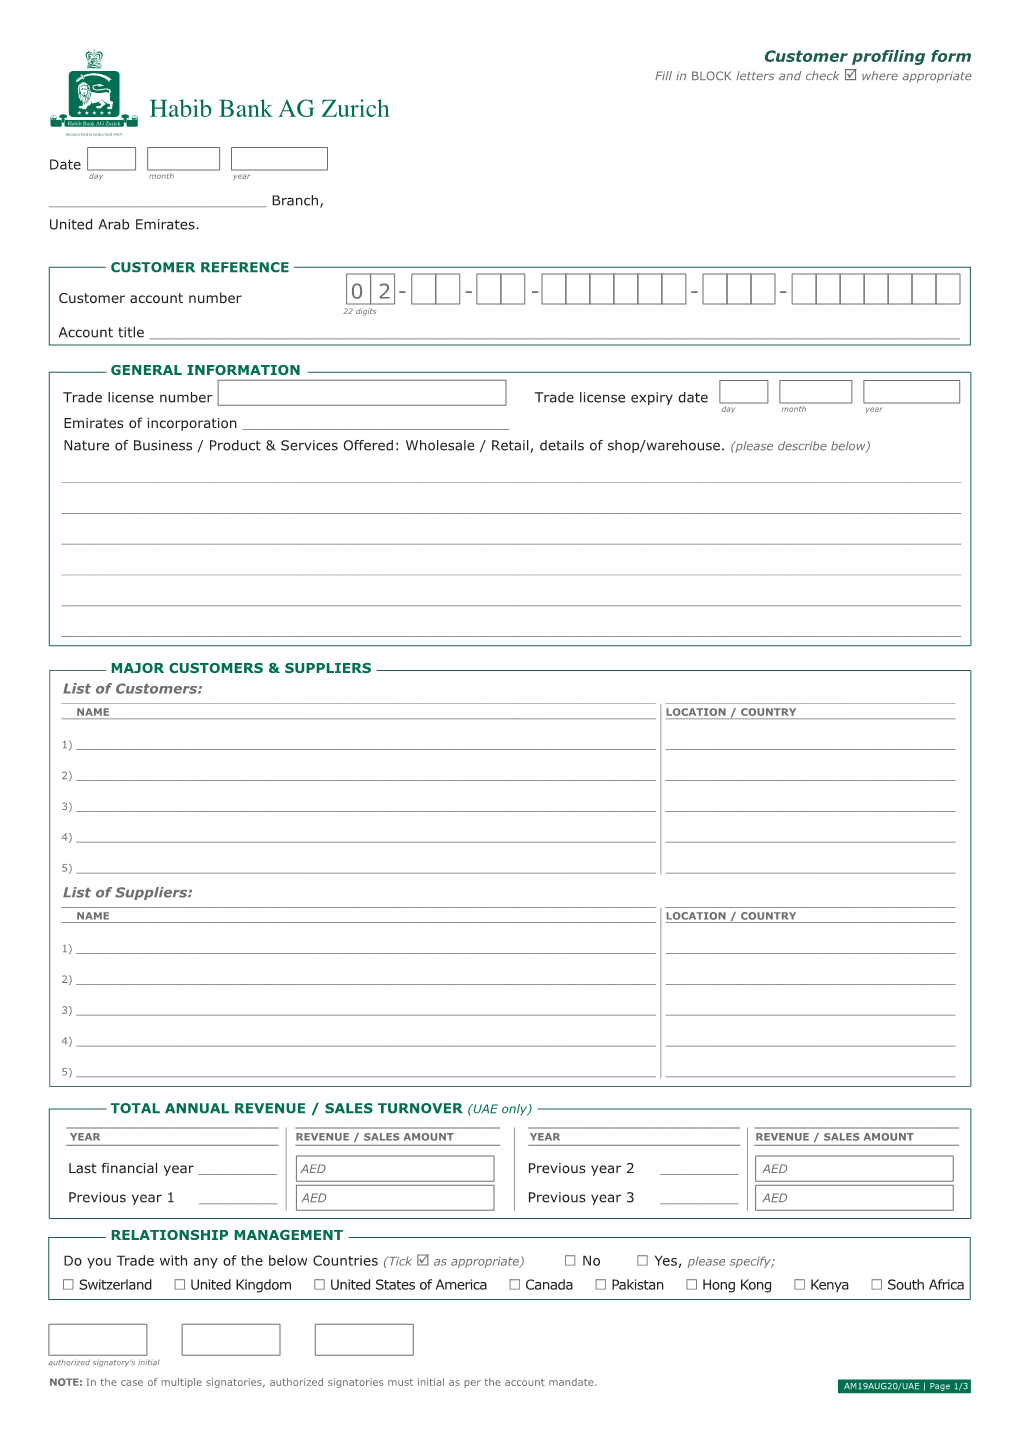 Customer Profiling Form Fill in BLOCK Letters and Check Þ Where Appropriate Habib Bank AG Zurich